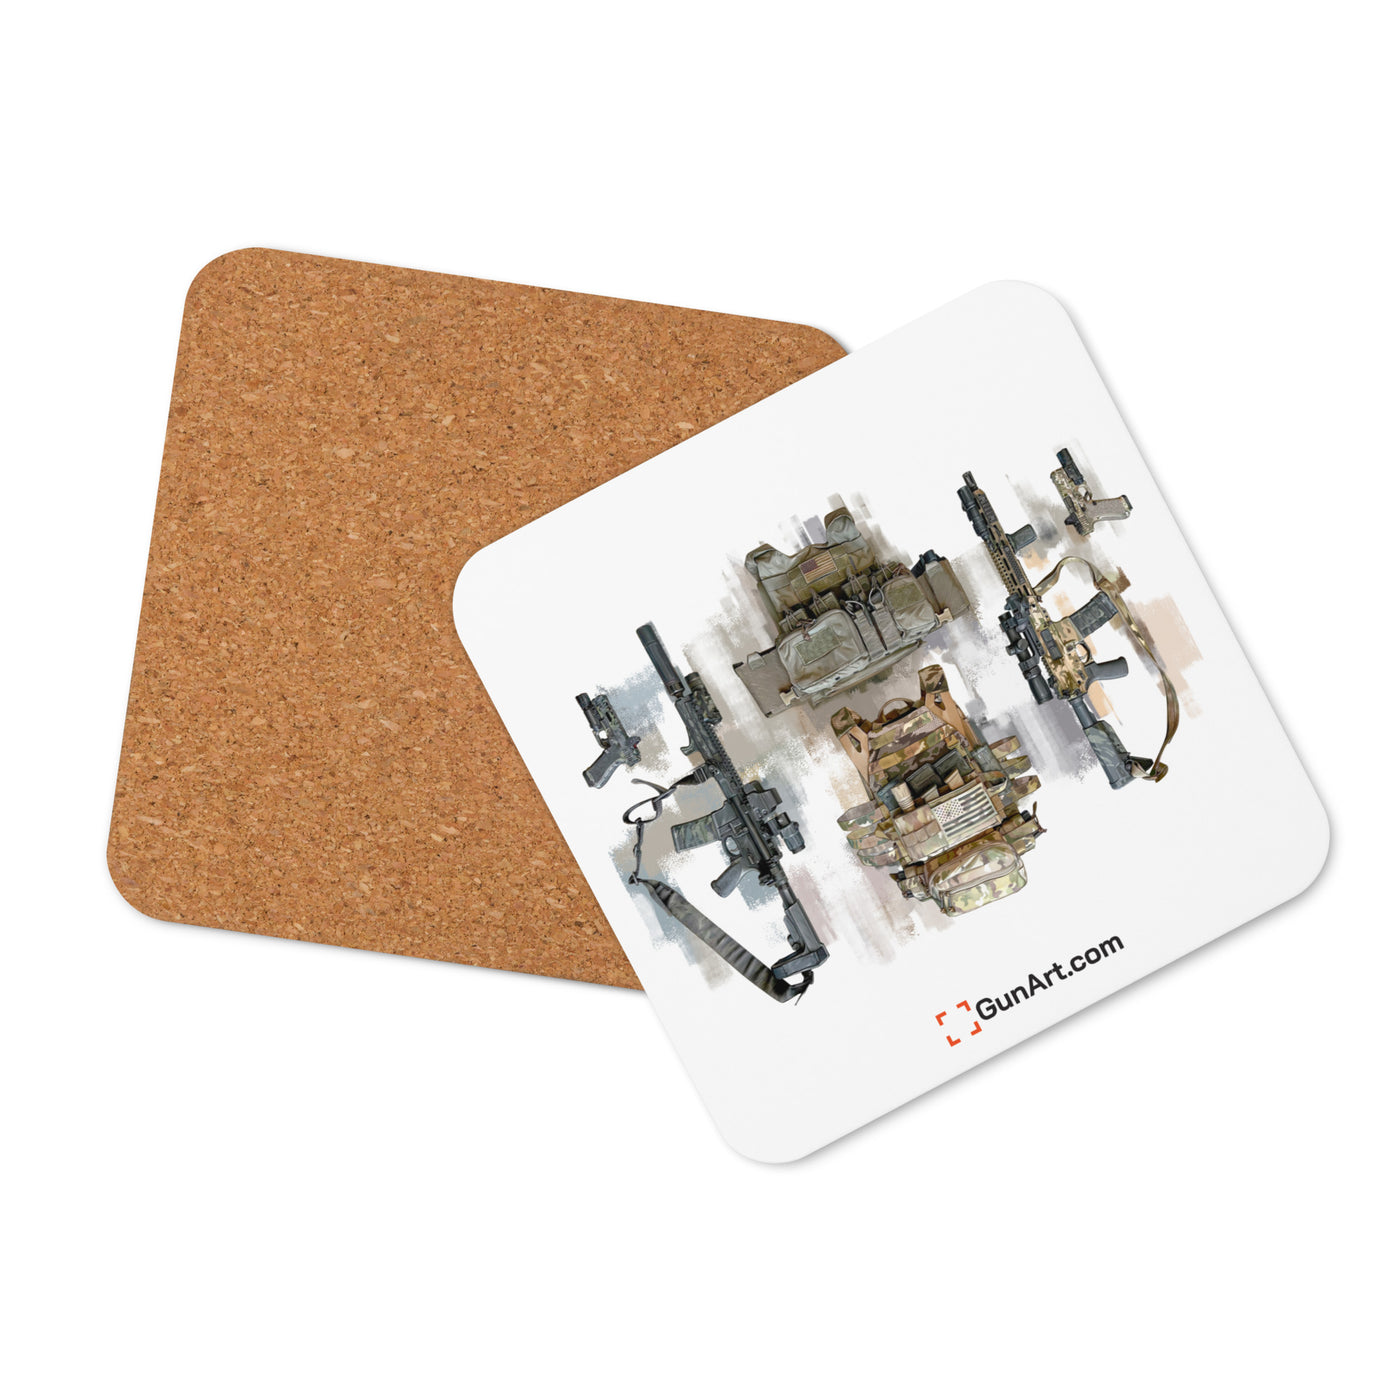 Stay Ready - Tactical Gear - AR15s and Pistols With Plate Carriers Cork-back Coaster